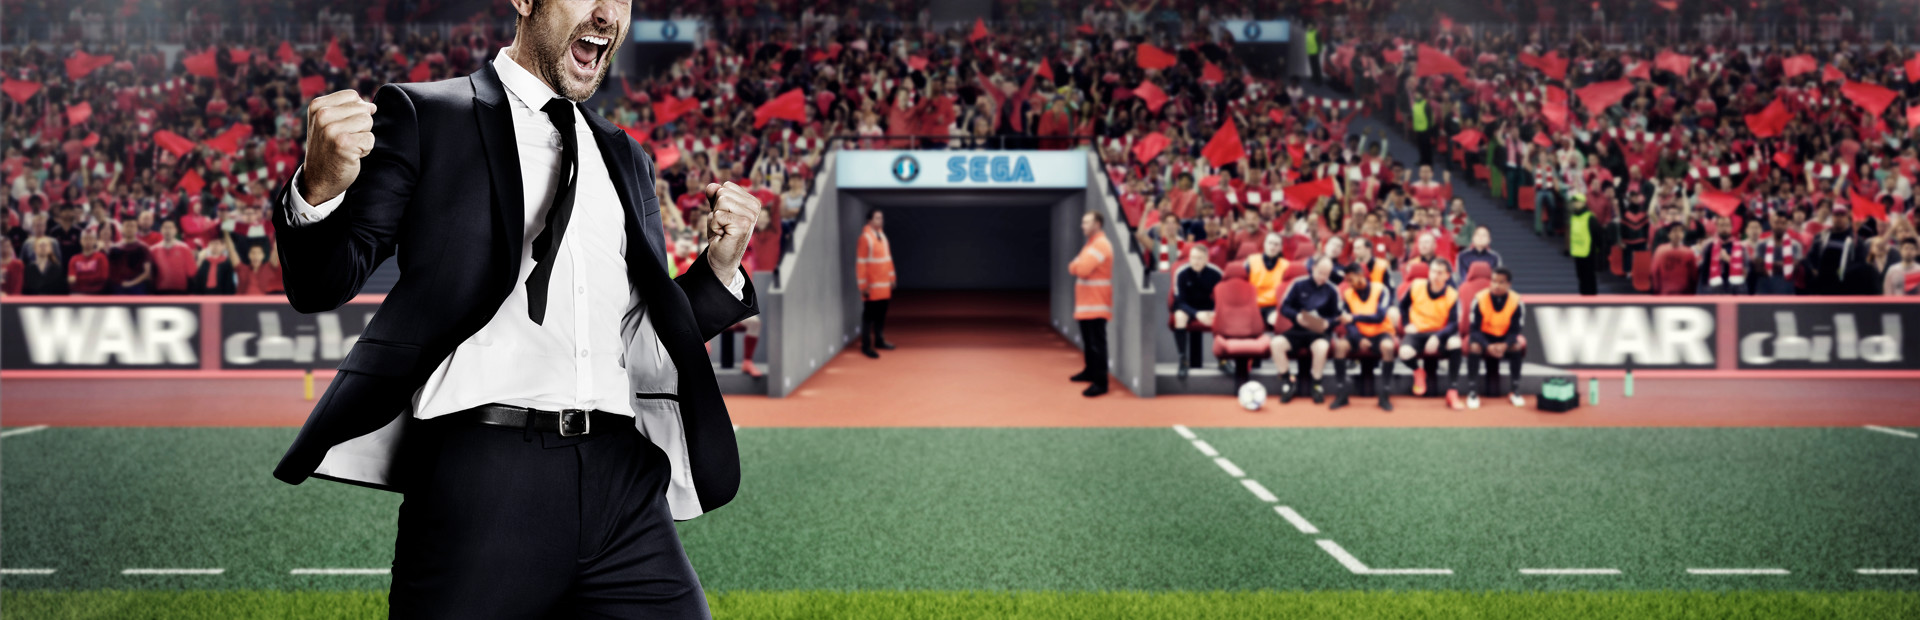 Football Manager 2018 cover image